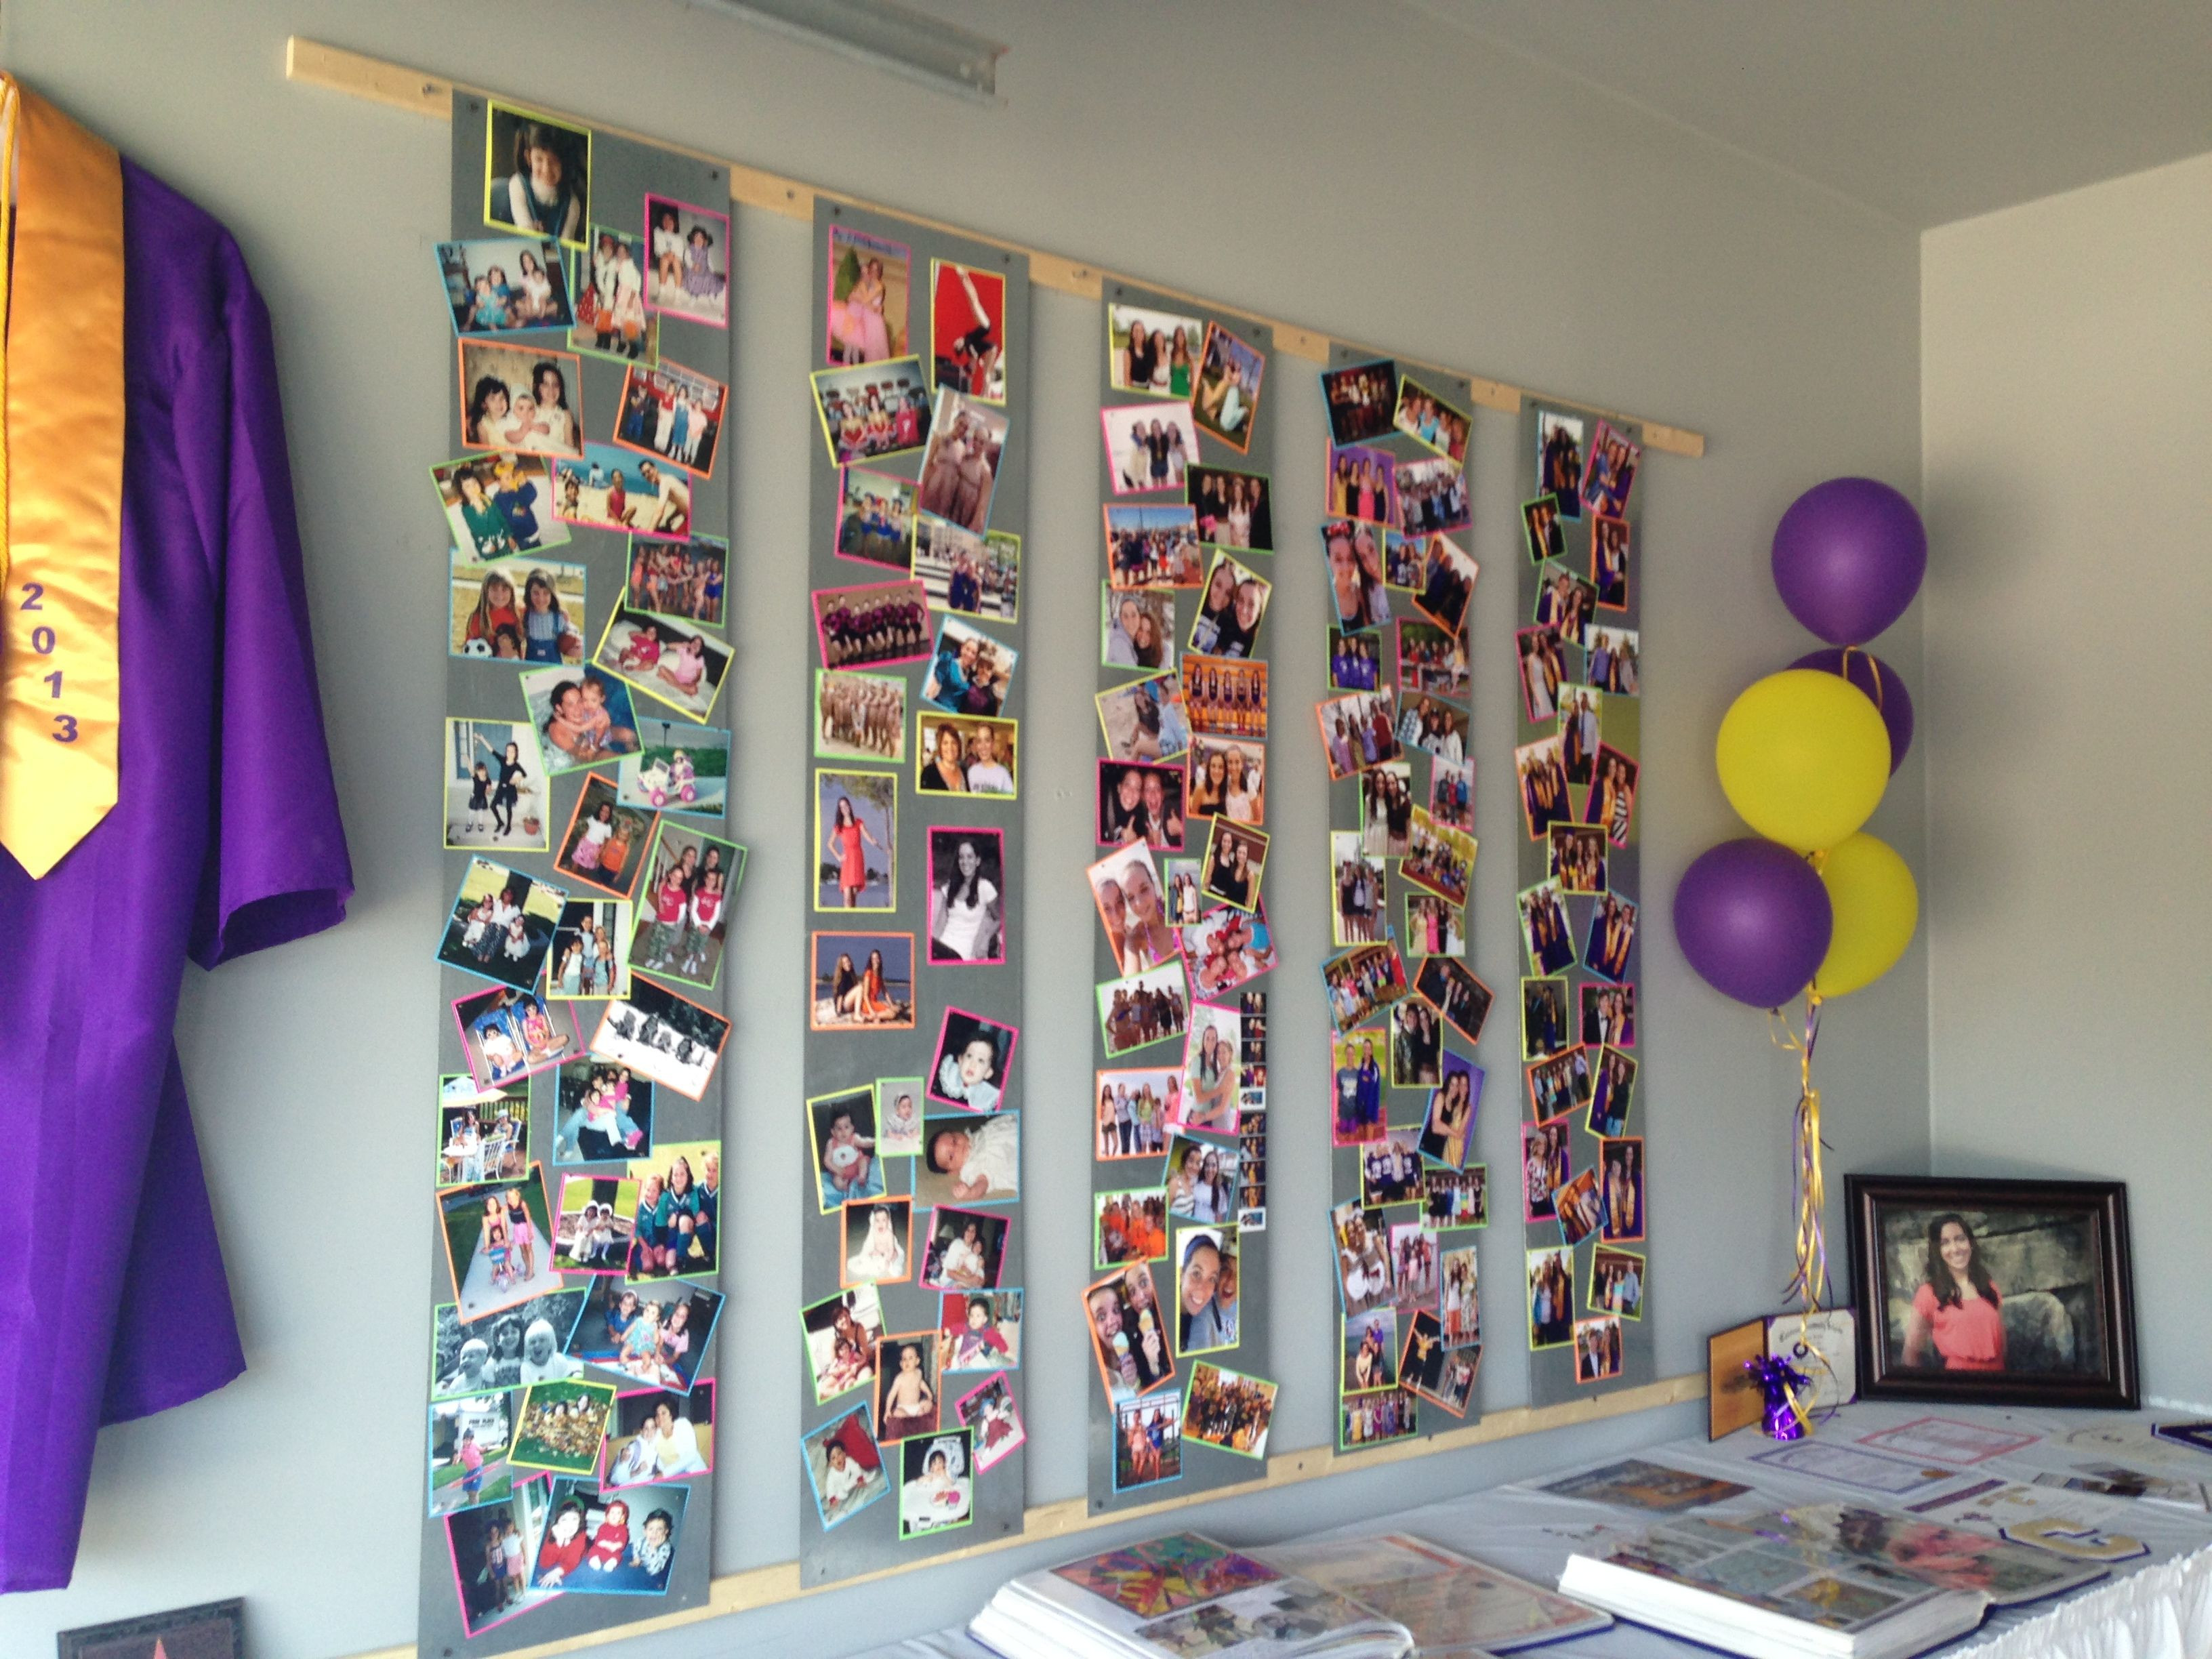 Graduation Party Picture Display Ideas
 Awesome Graduation Display Magnet boards photos